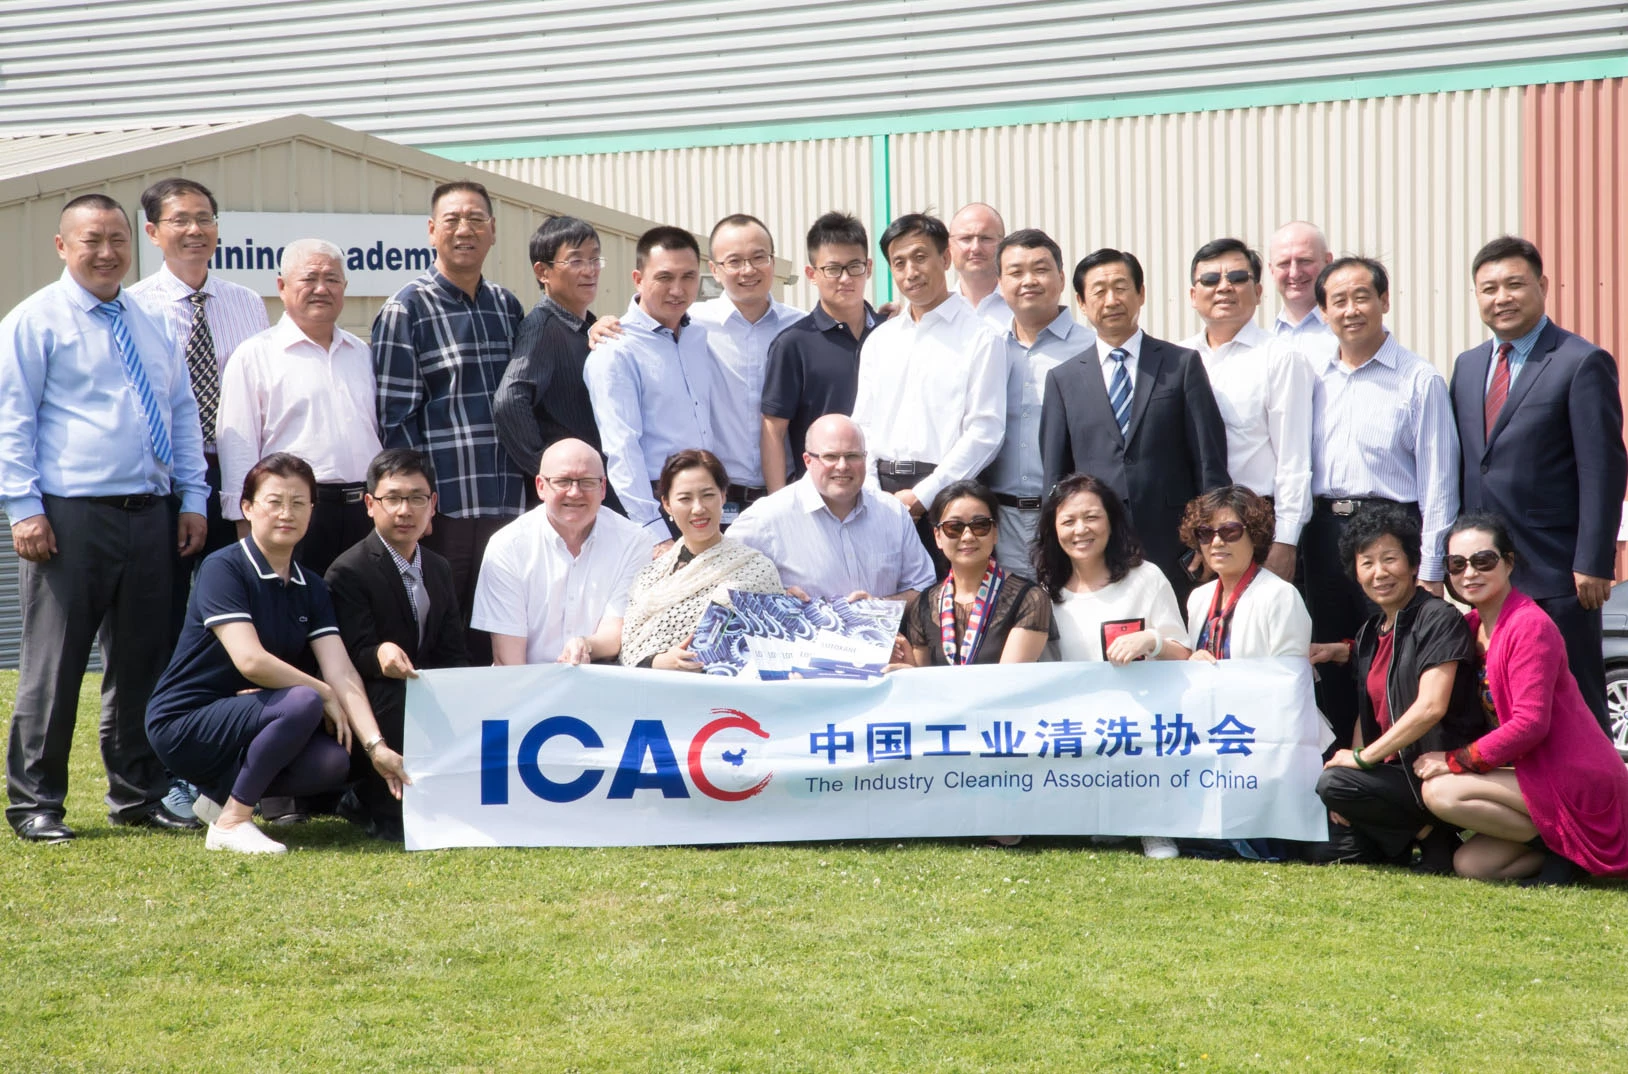 Industrial Cleaning Association of China delegates outside Arrow Solutions' training facility 